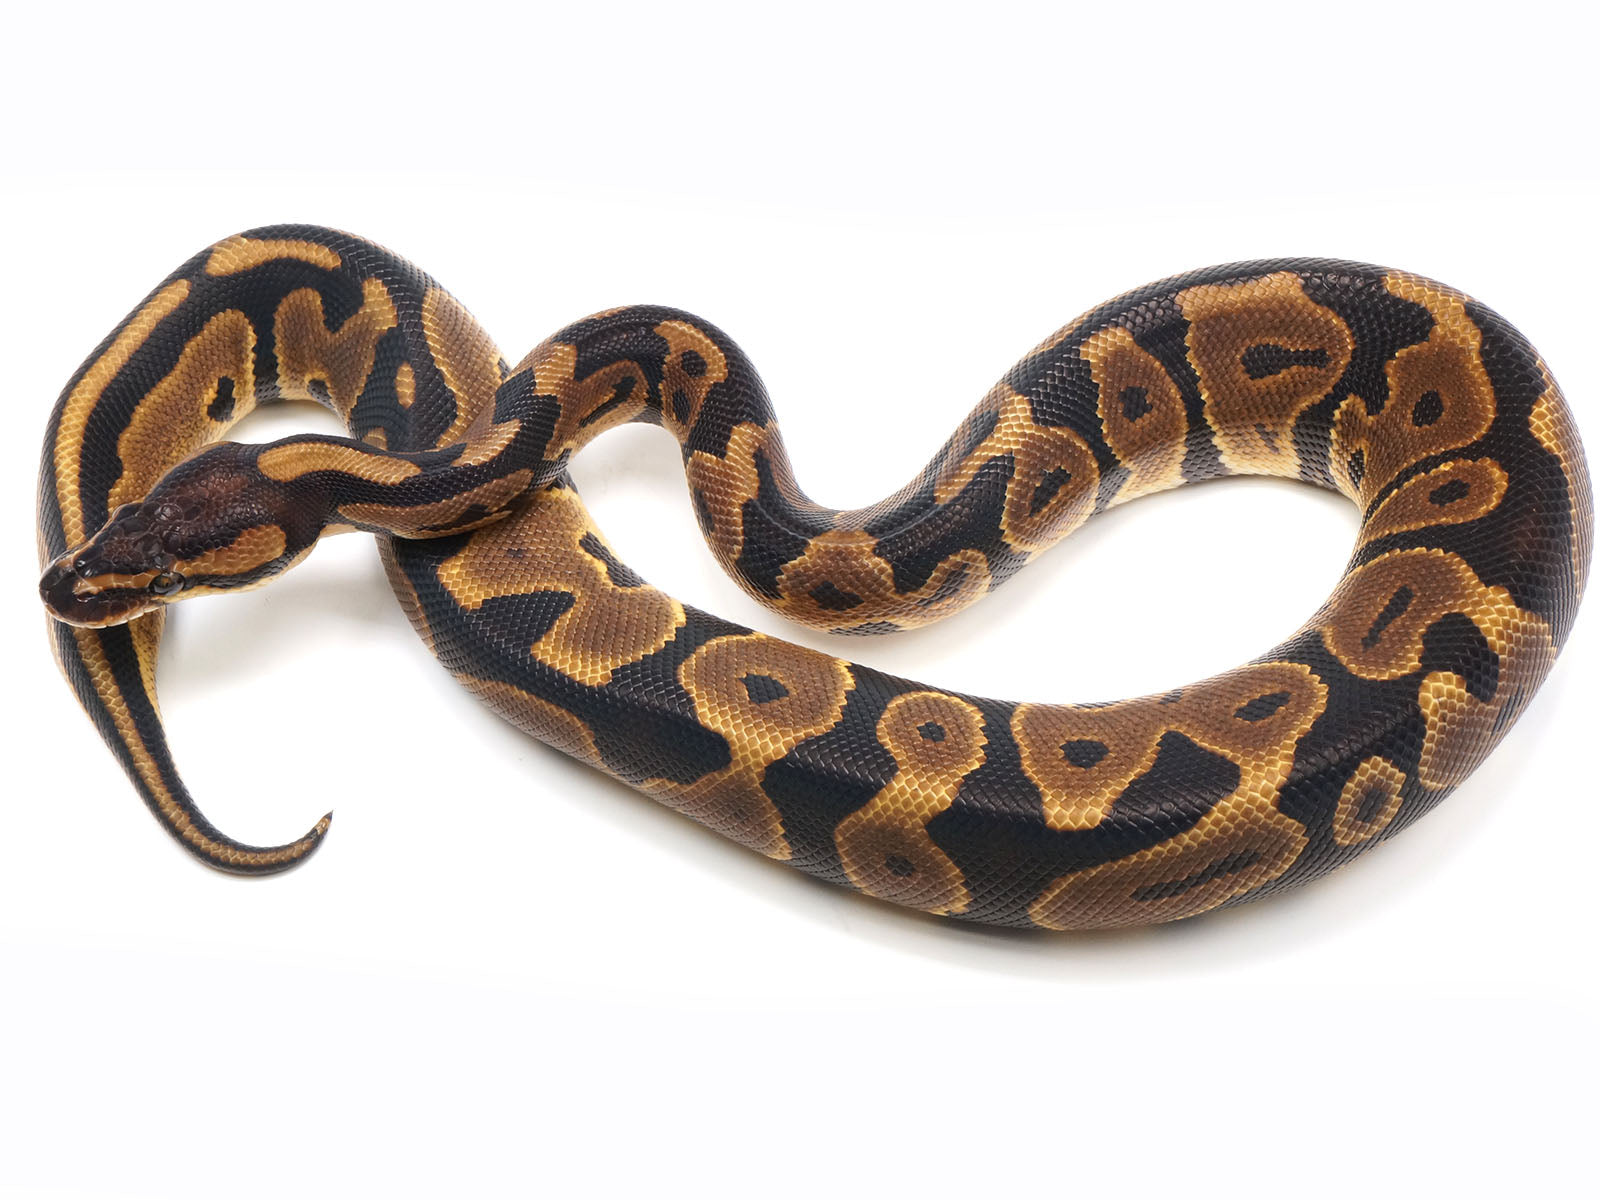 2021 Female Confusion Ball Python New England Reptile Nerd 6857